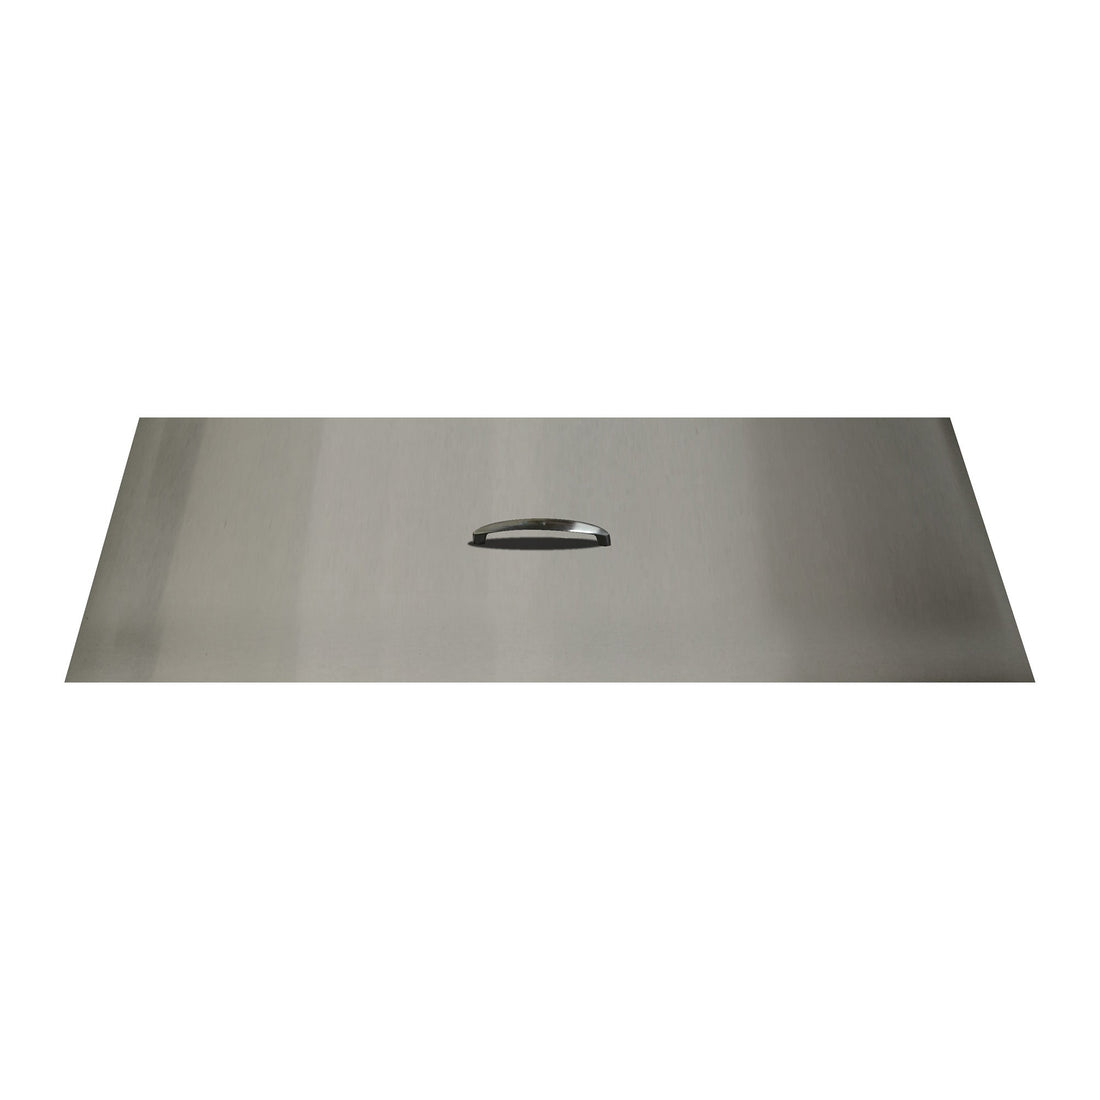 The Outdoor Plus - 10" x 50" Stainless Steel Rectangular Fire Pit Lid Cover - OPT-DXRC-1050